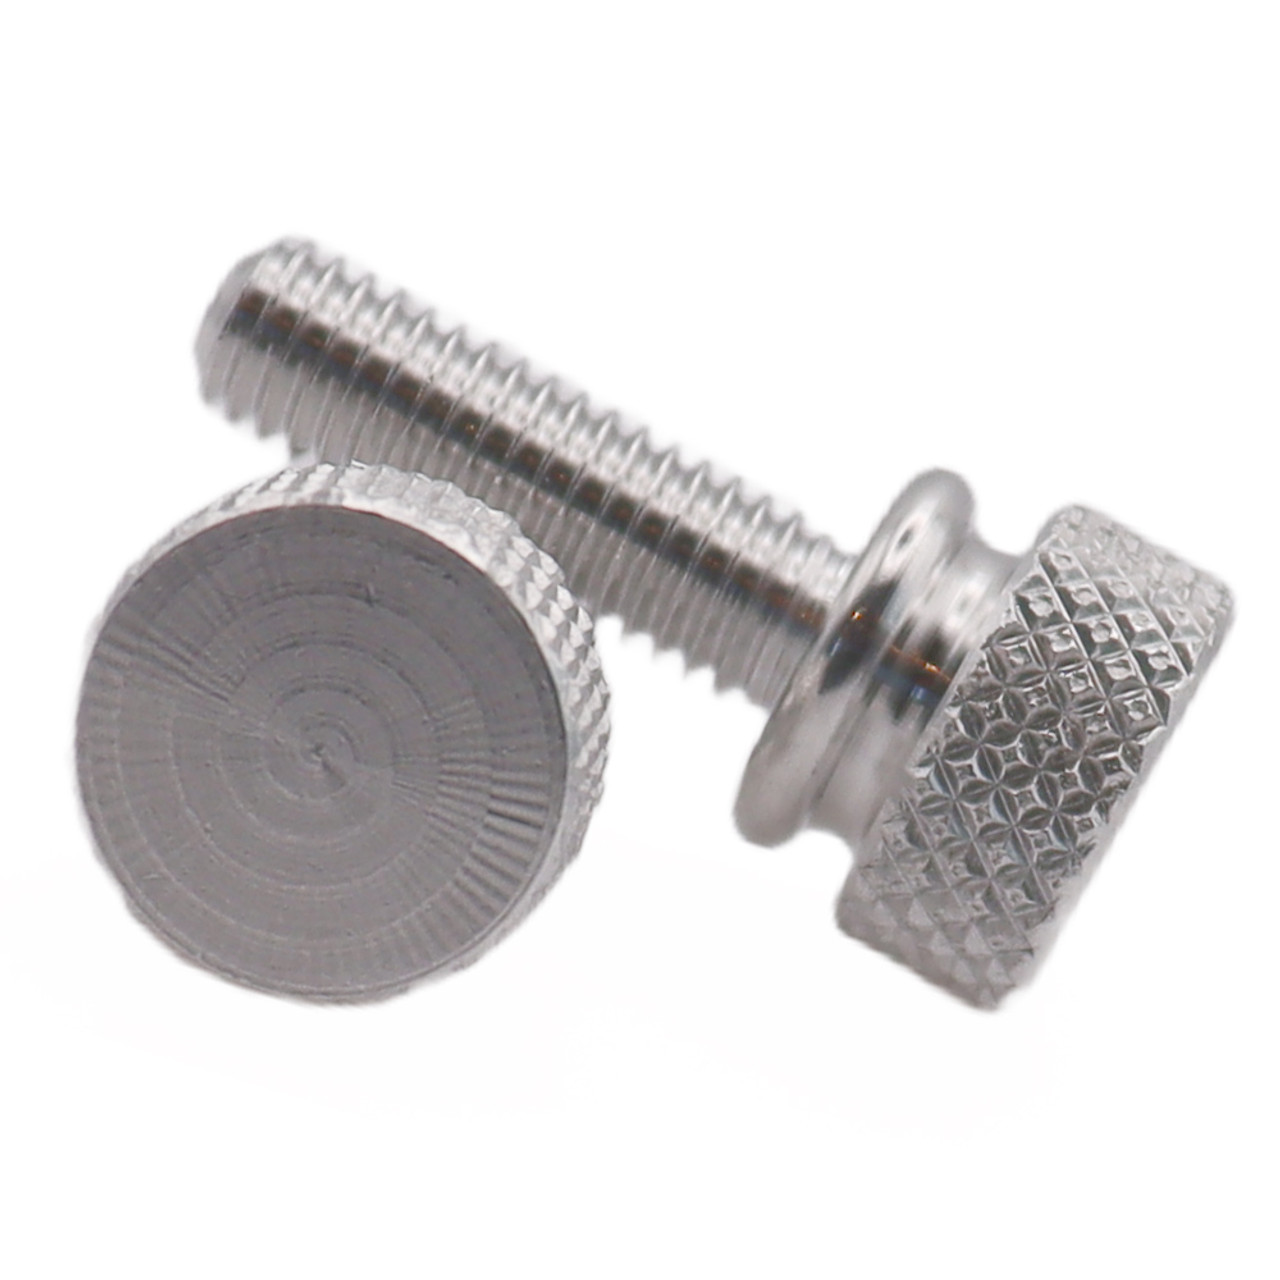 #6-32 x 1/2" (FT) Coarse Thread Knurled Thumb Screw with Washer Face Aluminum